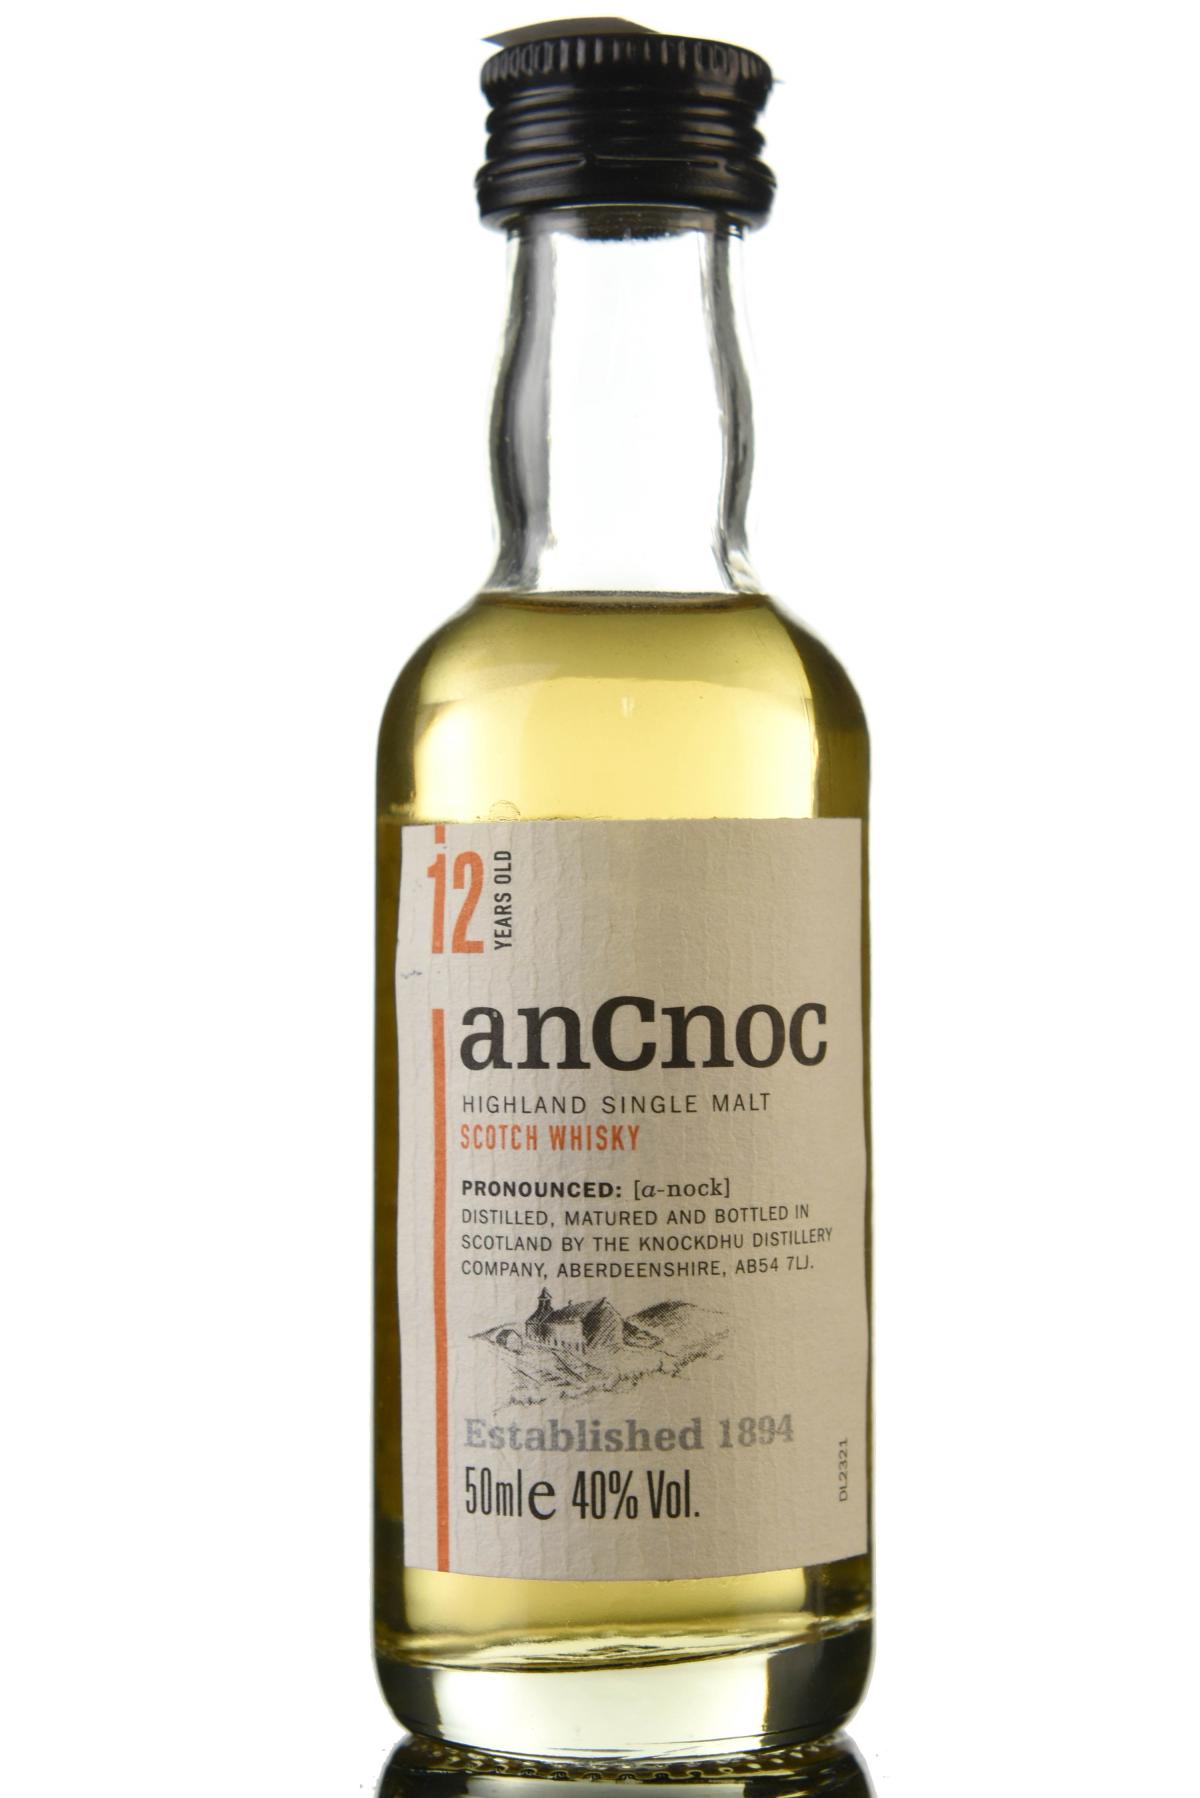 An Cnoc 12 Year Old Miniature